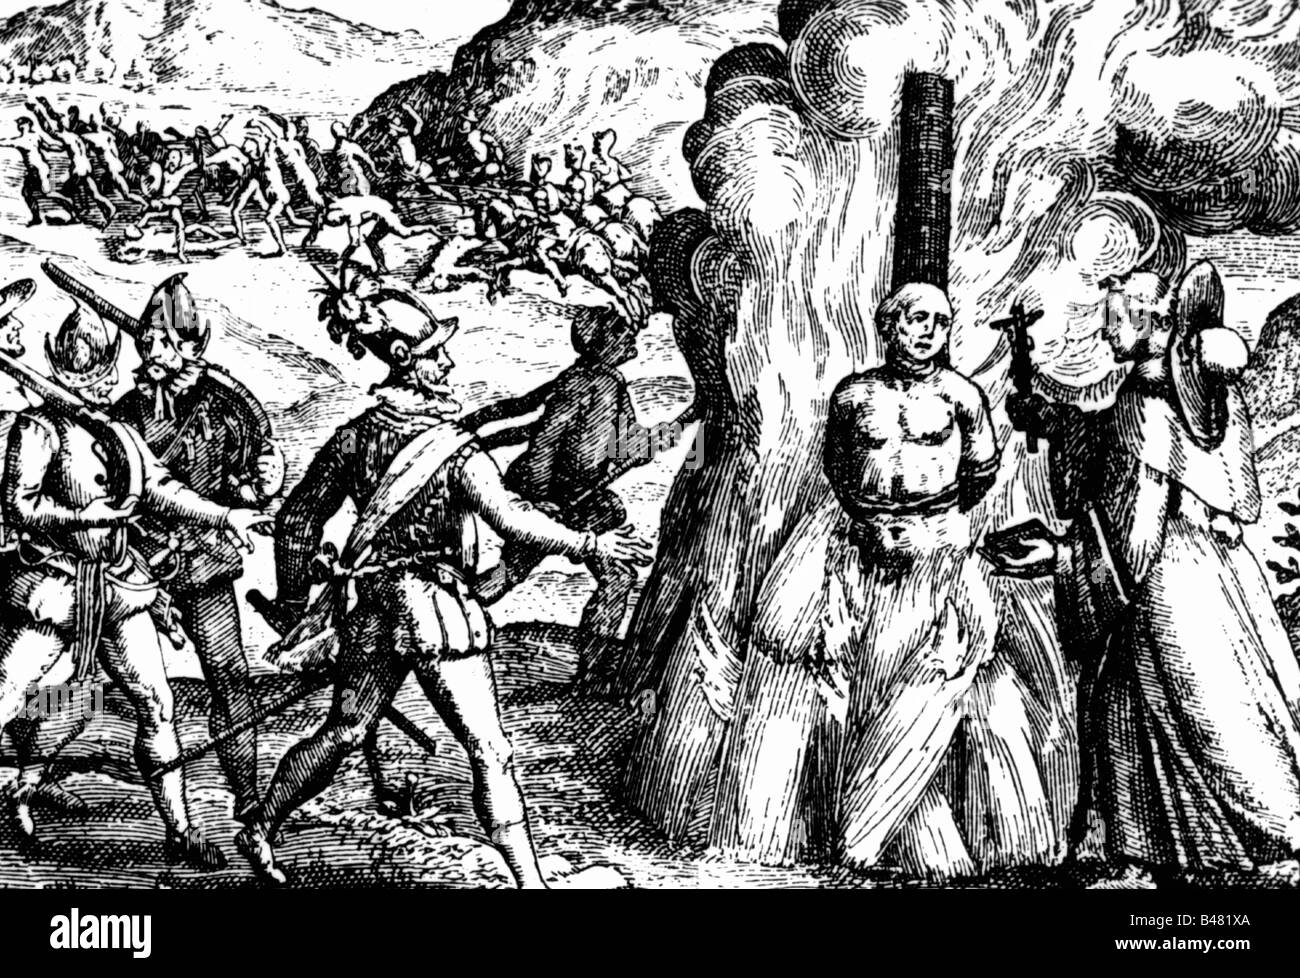 geography / travel, South America, conquest by the Spanish, 16th century, chief Indian burned by inquisition, contemporary copper engraving, historic, historical, South America, horror, massacre, colonialism, burn, indigenous people, soldiers, conquista, conquistadores, fire, catholic monk, priest, missionar, inhumanity, crime, prosecution, death, Cuauthemoc, conqueror, SOAM, CEAM, male, man, men, Stock Photo